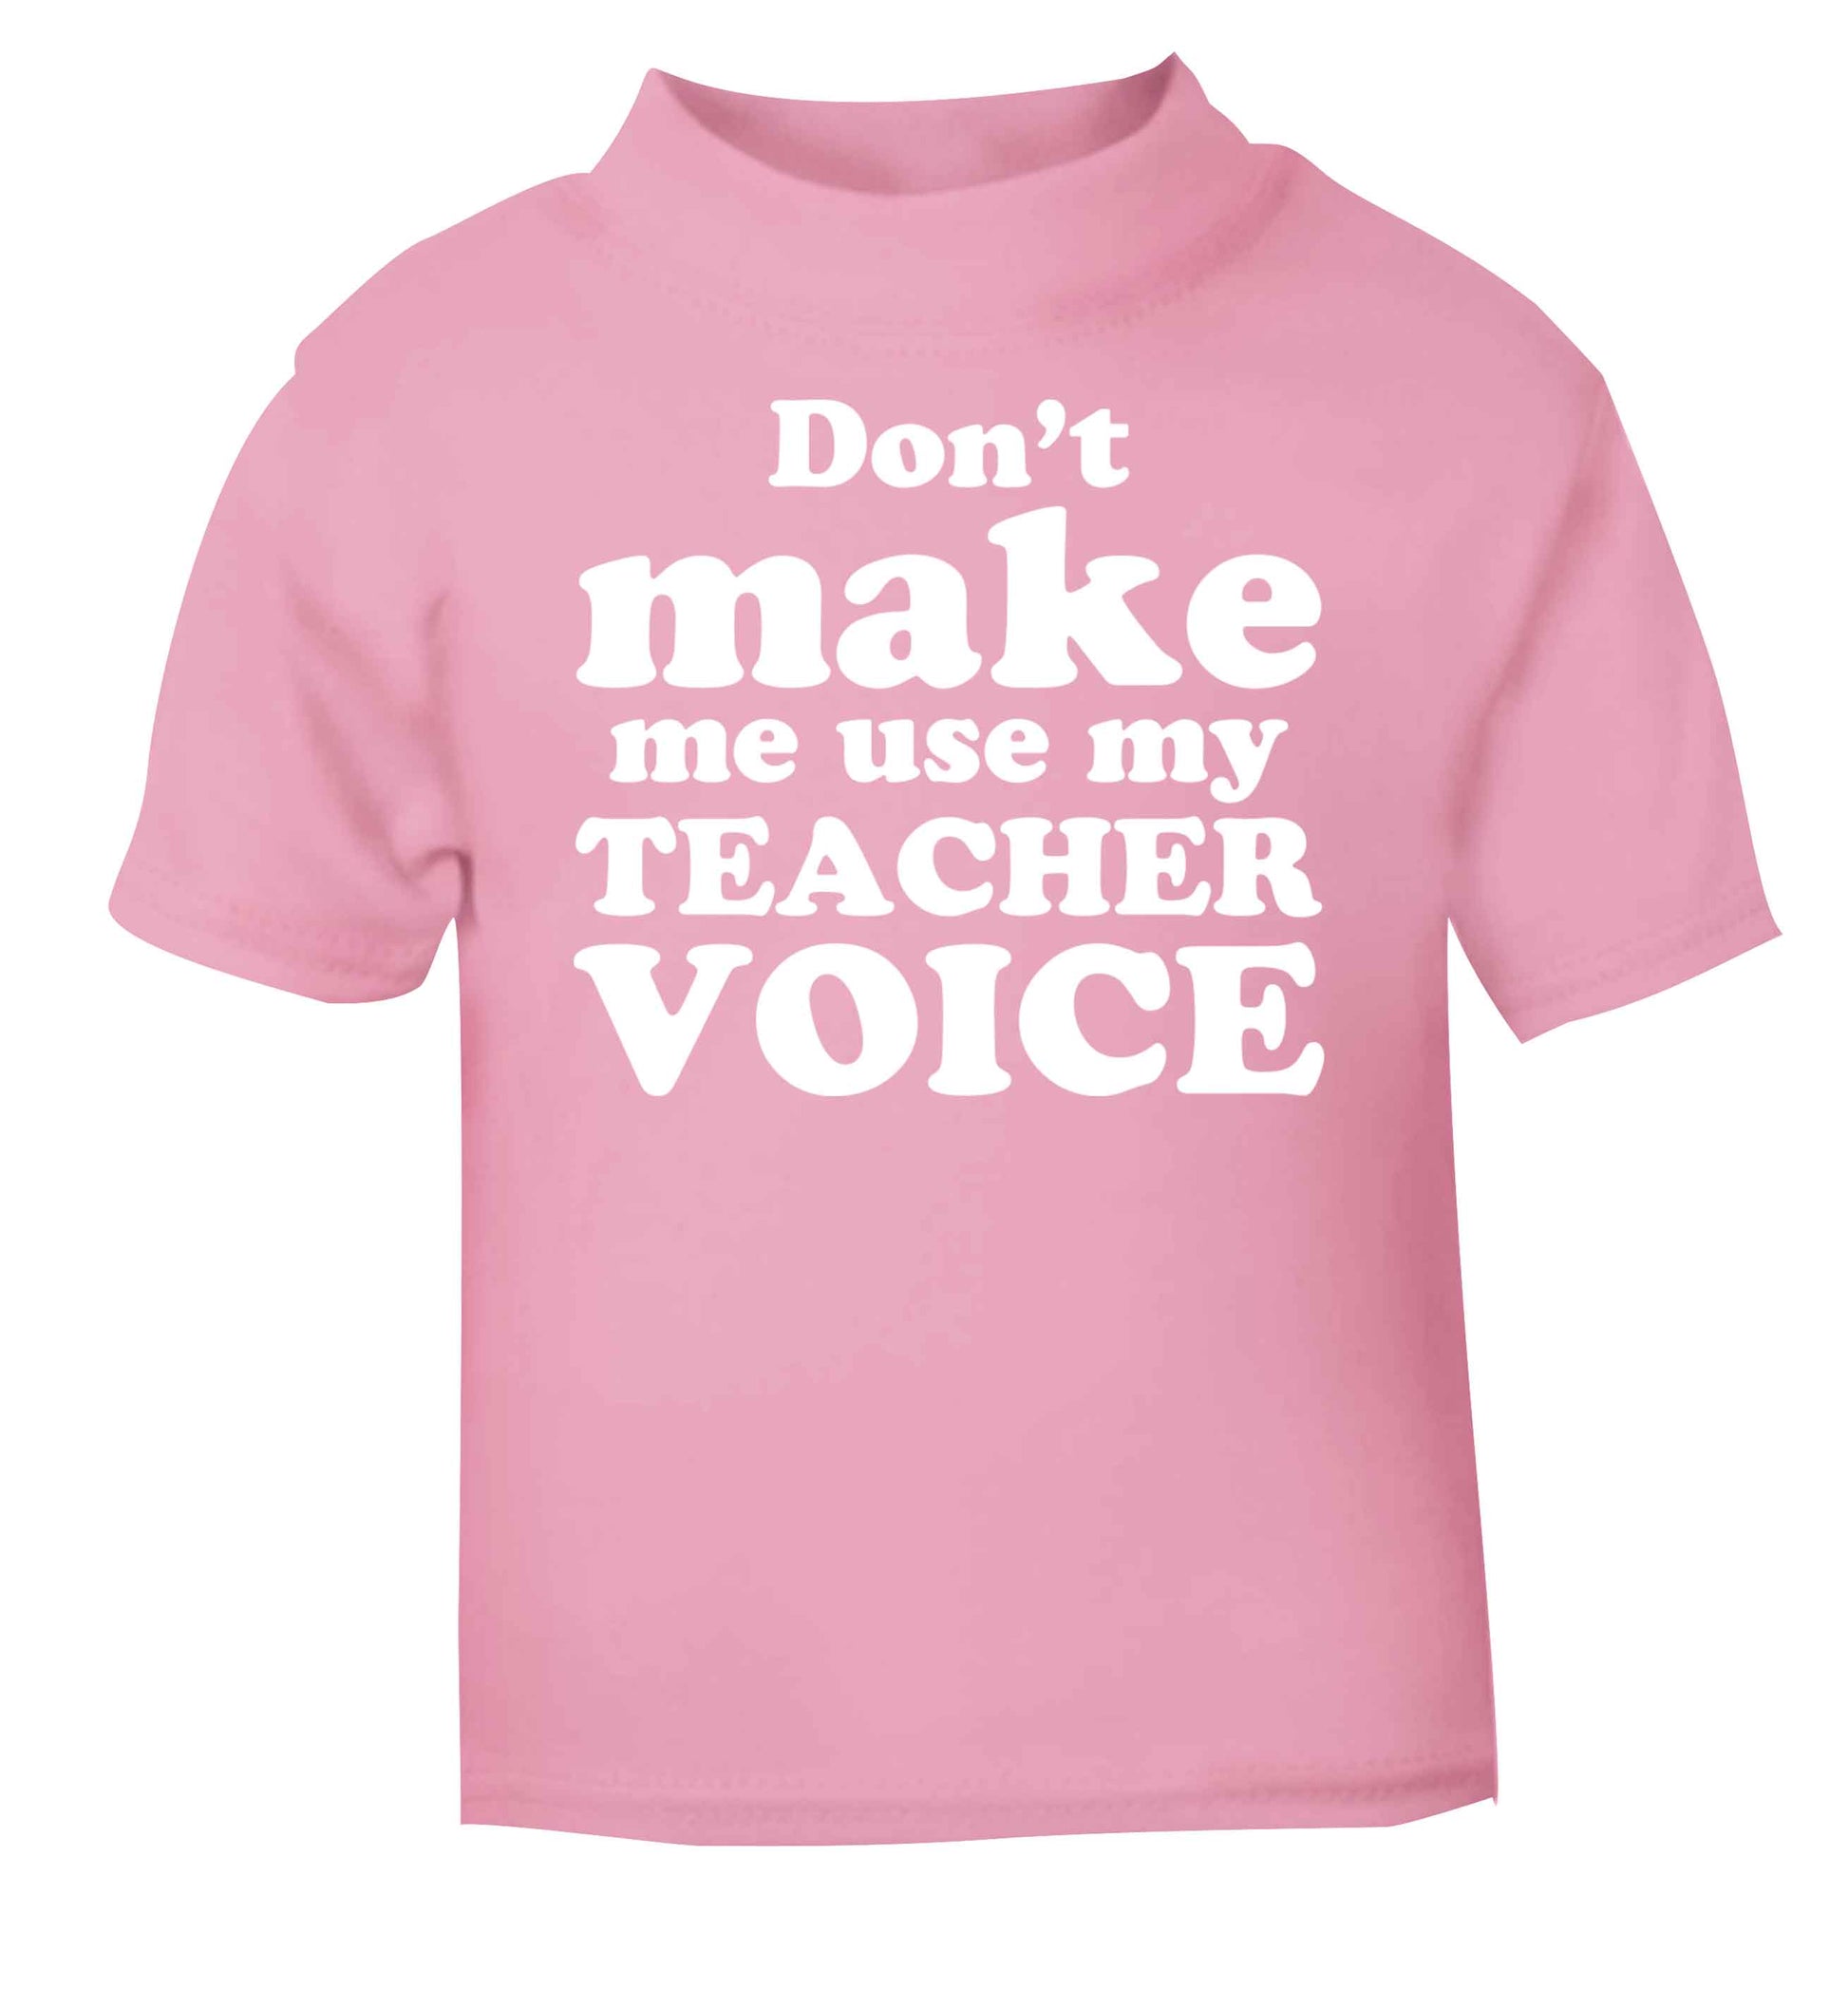 Don't make me use my teacher voice light pink baby toddler Tshirt 2 Years